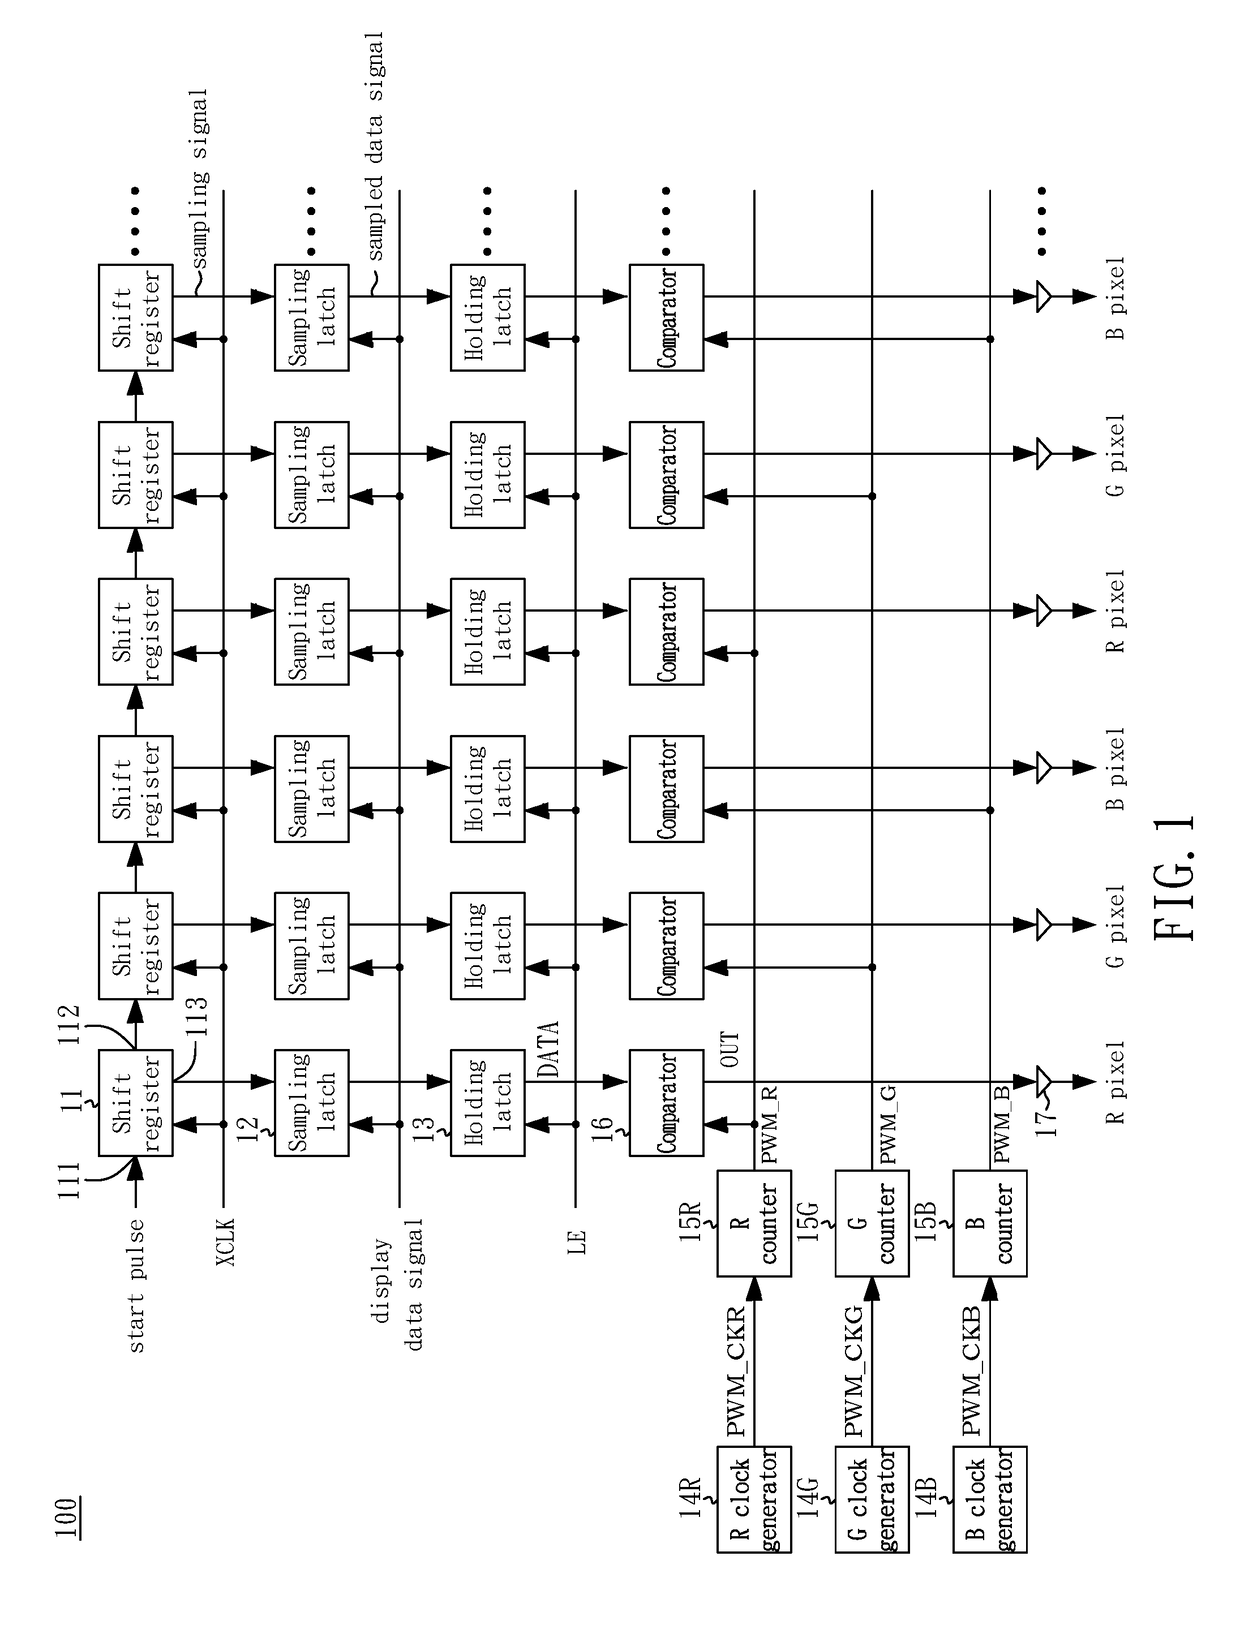 Data driver of a microled display